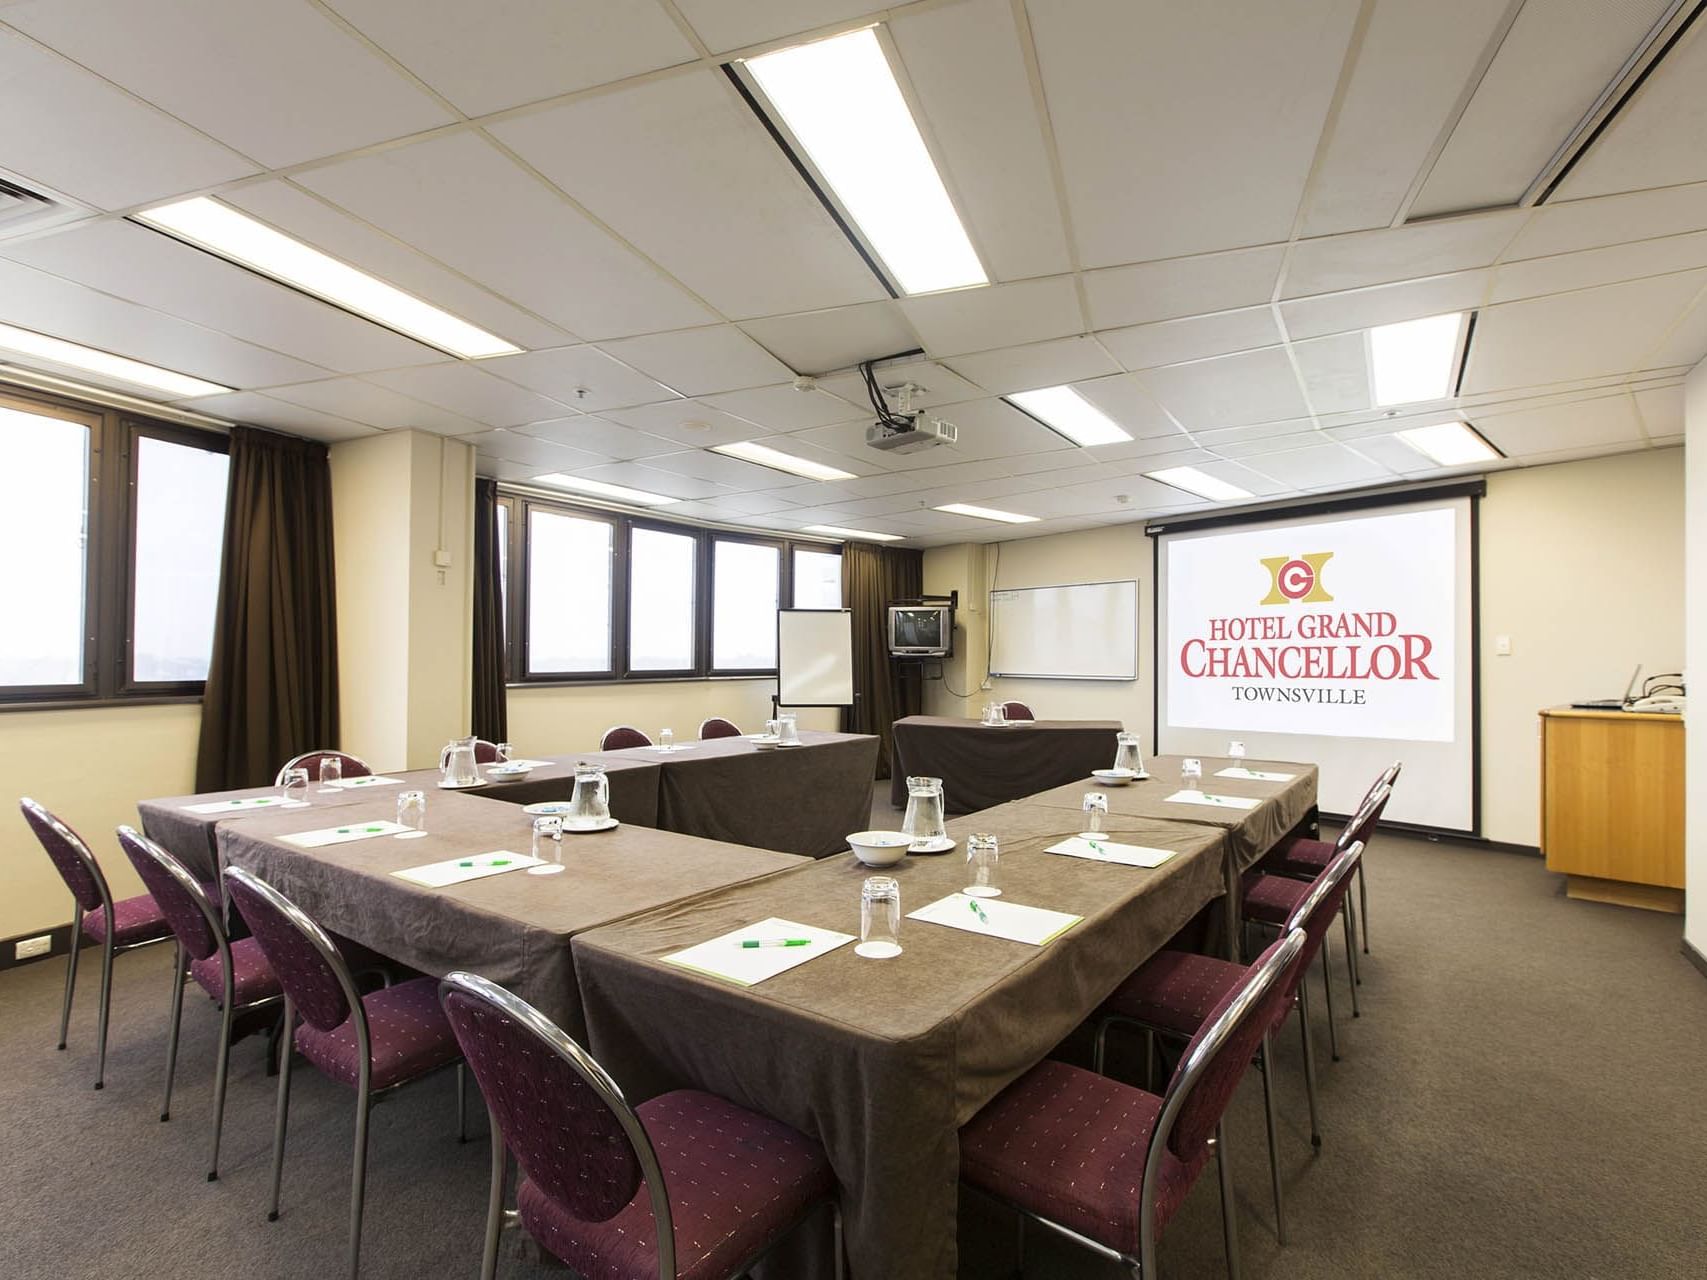 U-shaped meeting room set up in Ross Creek Room at Hotel Grand Chancellor Townsville